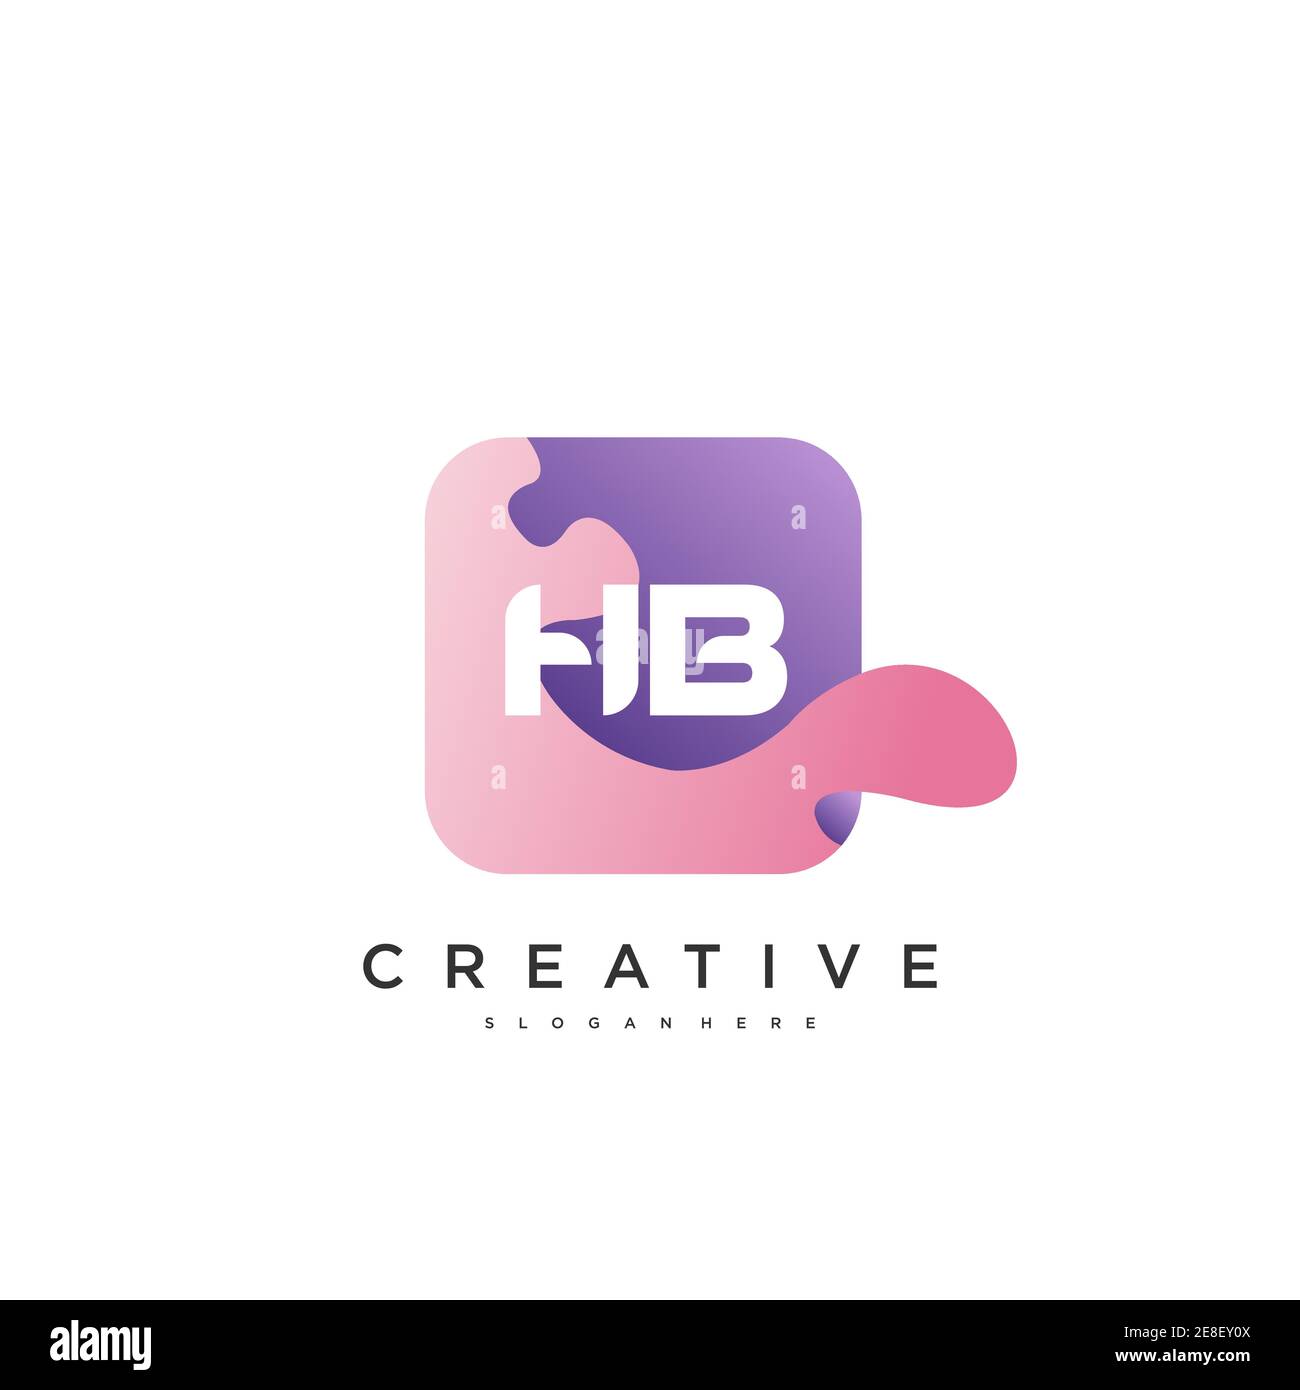 Hb designs, themes, templates and downloadable graphic elements on